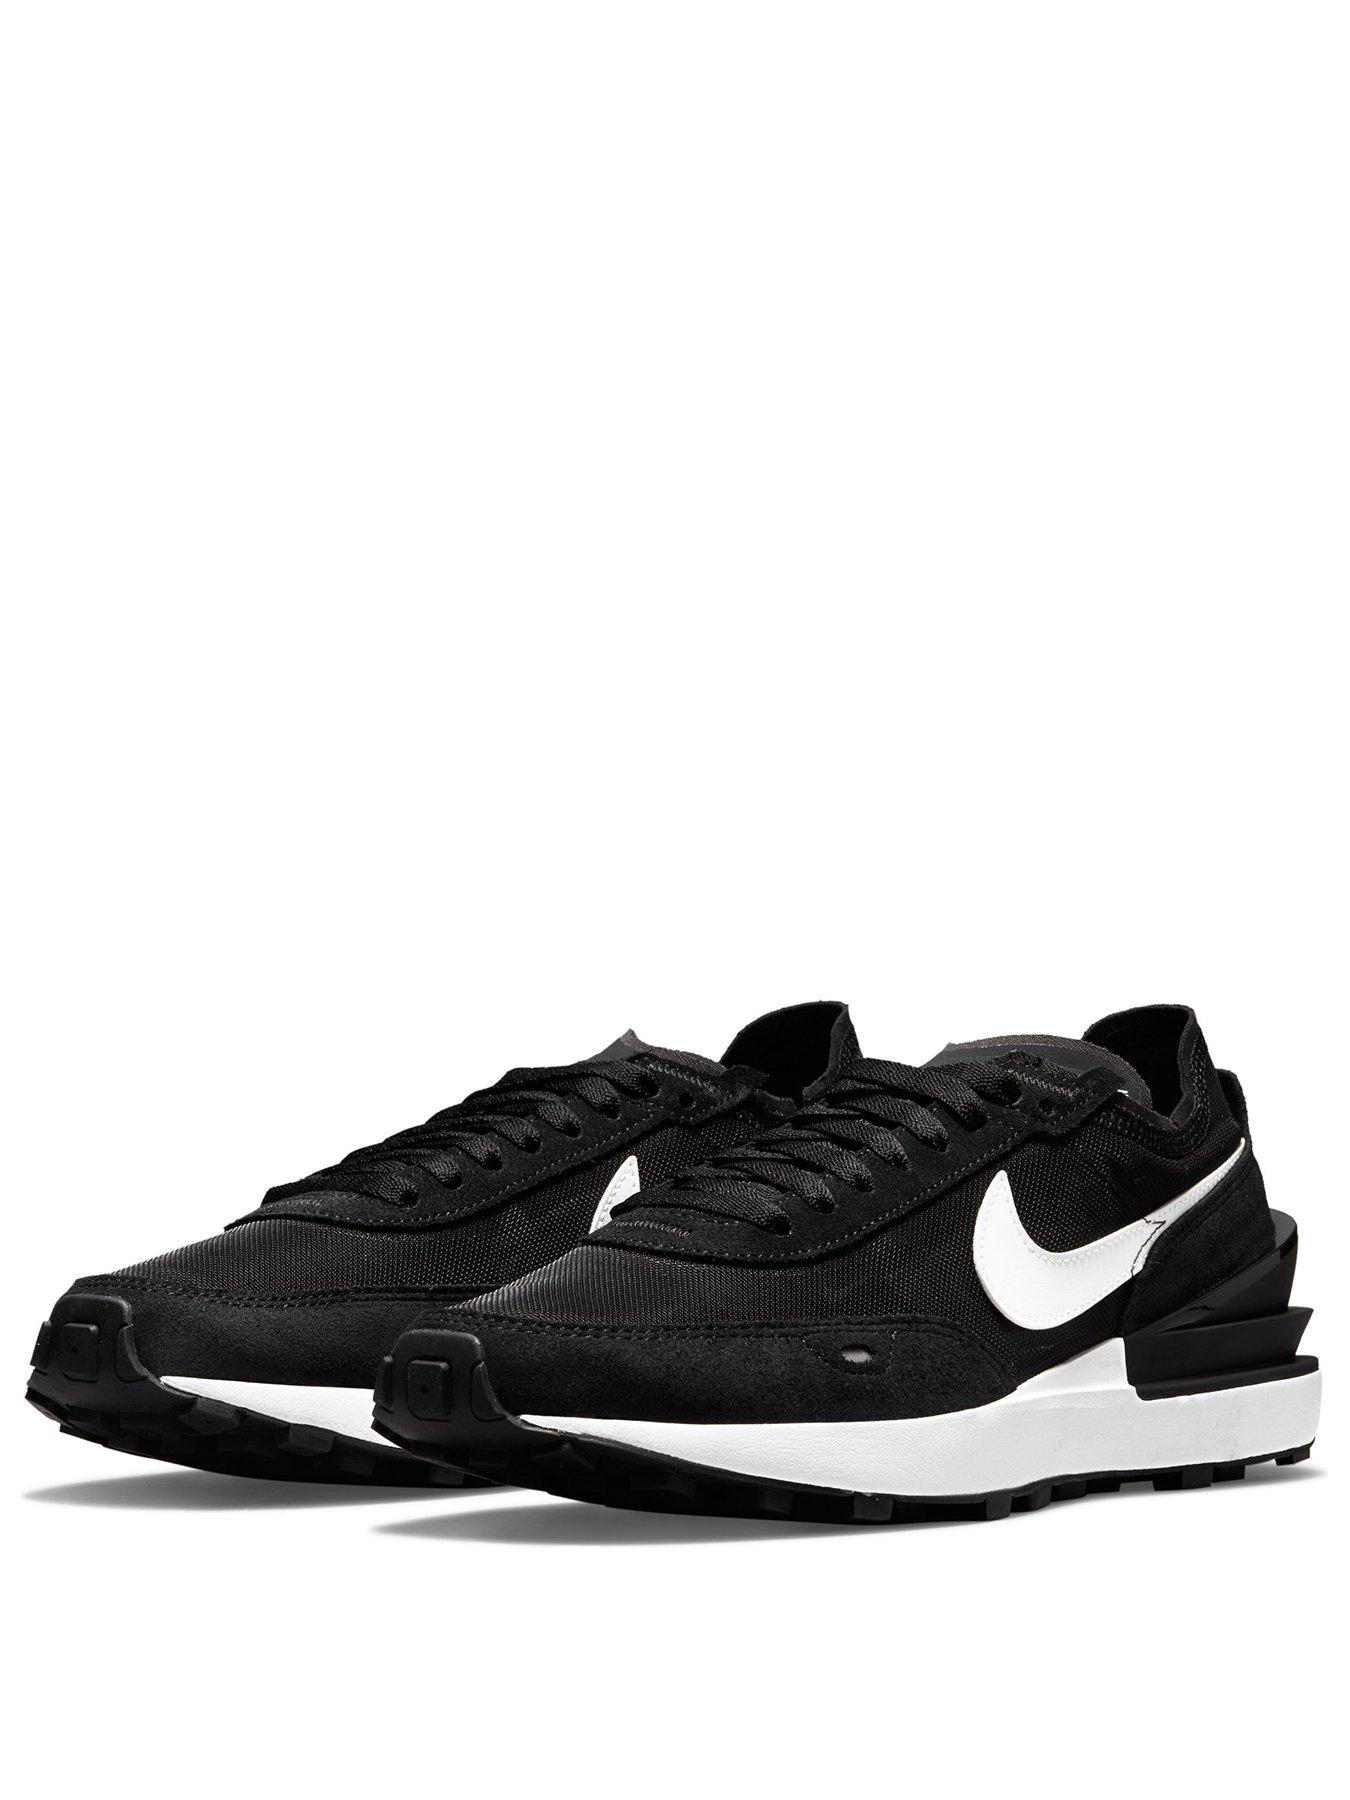 nike trainers black and white